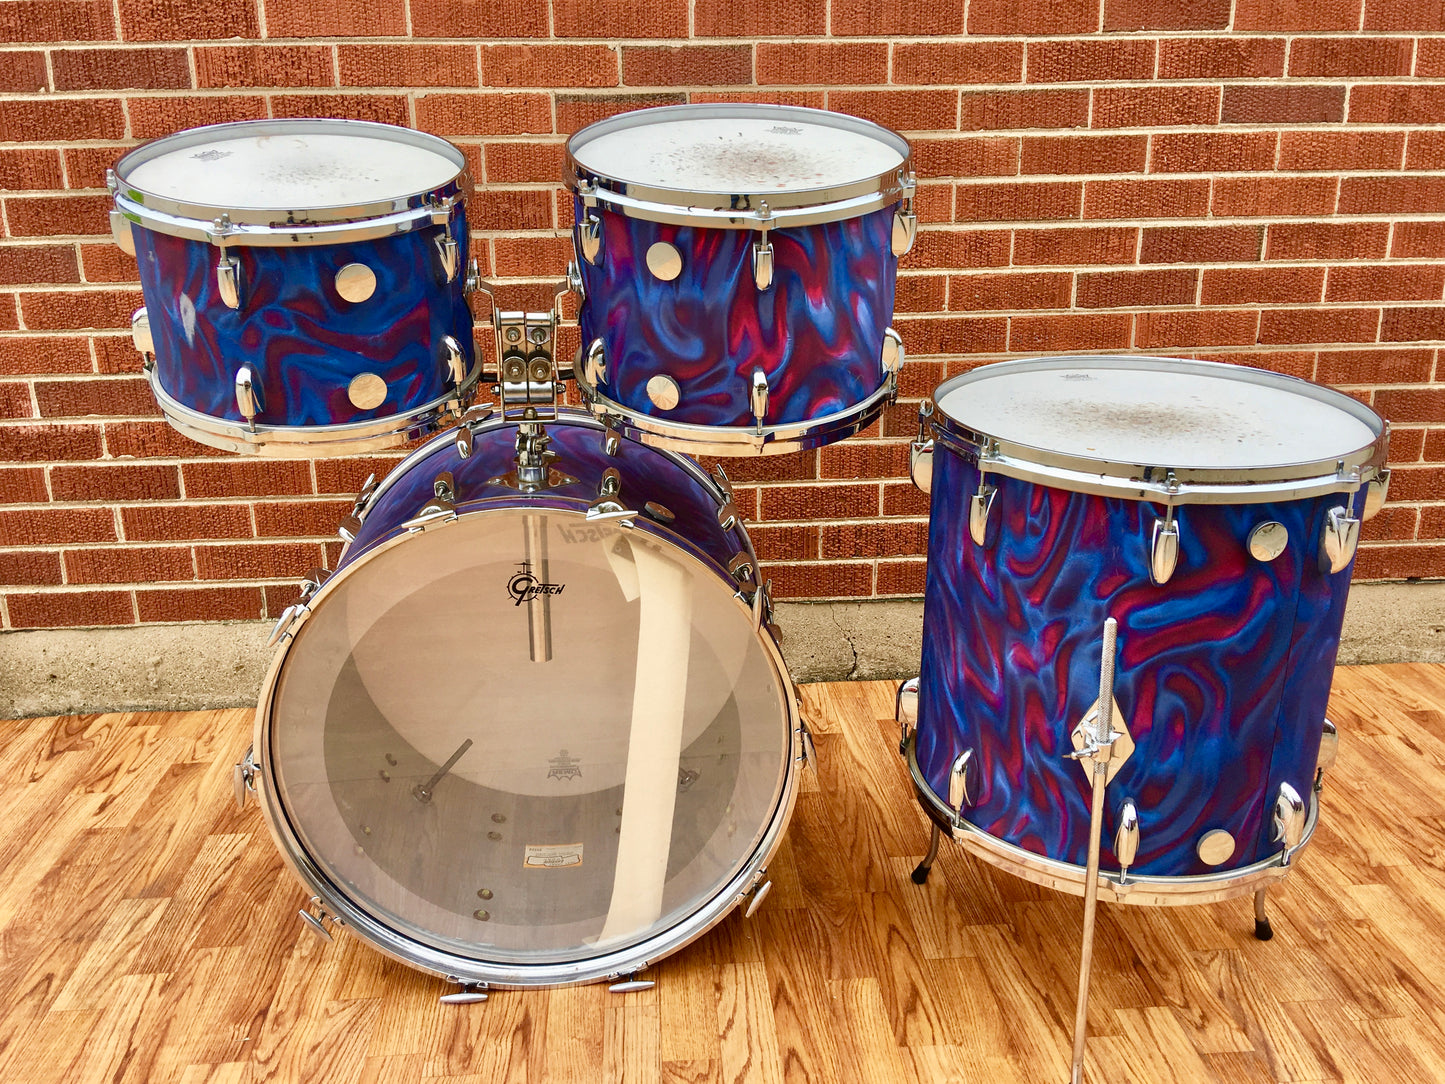 1971 Gretsch Stop Sign Badge Drum Set in Peacock Satin Flame